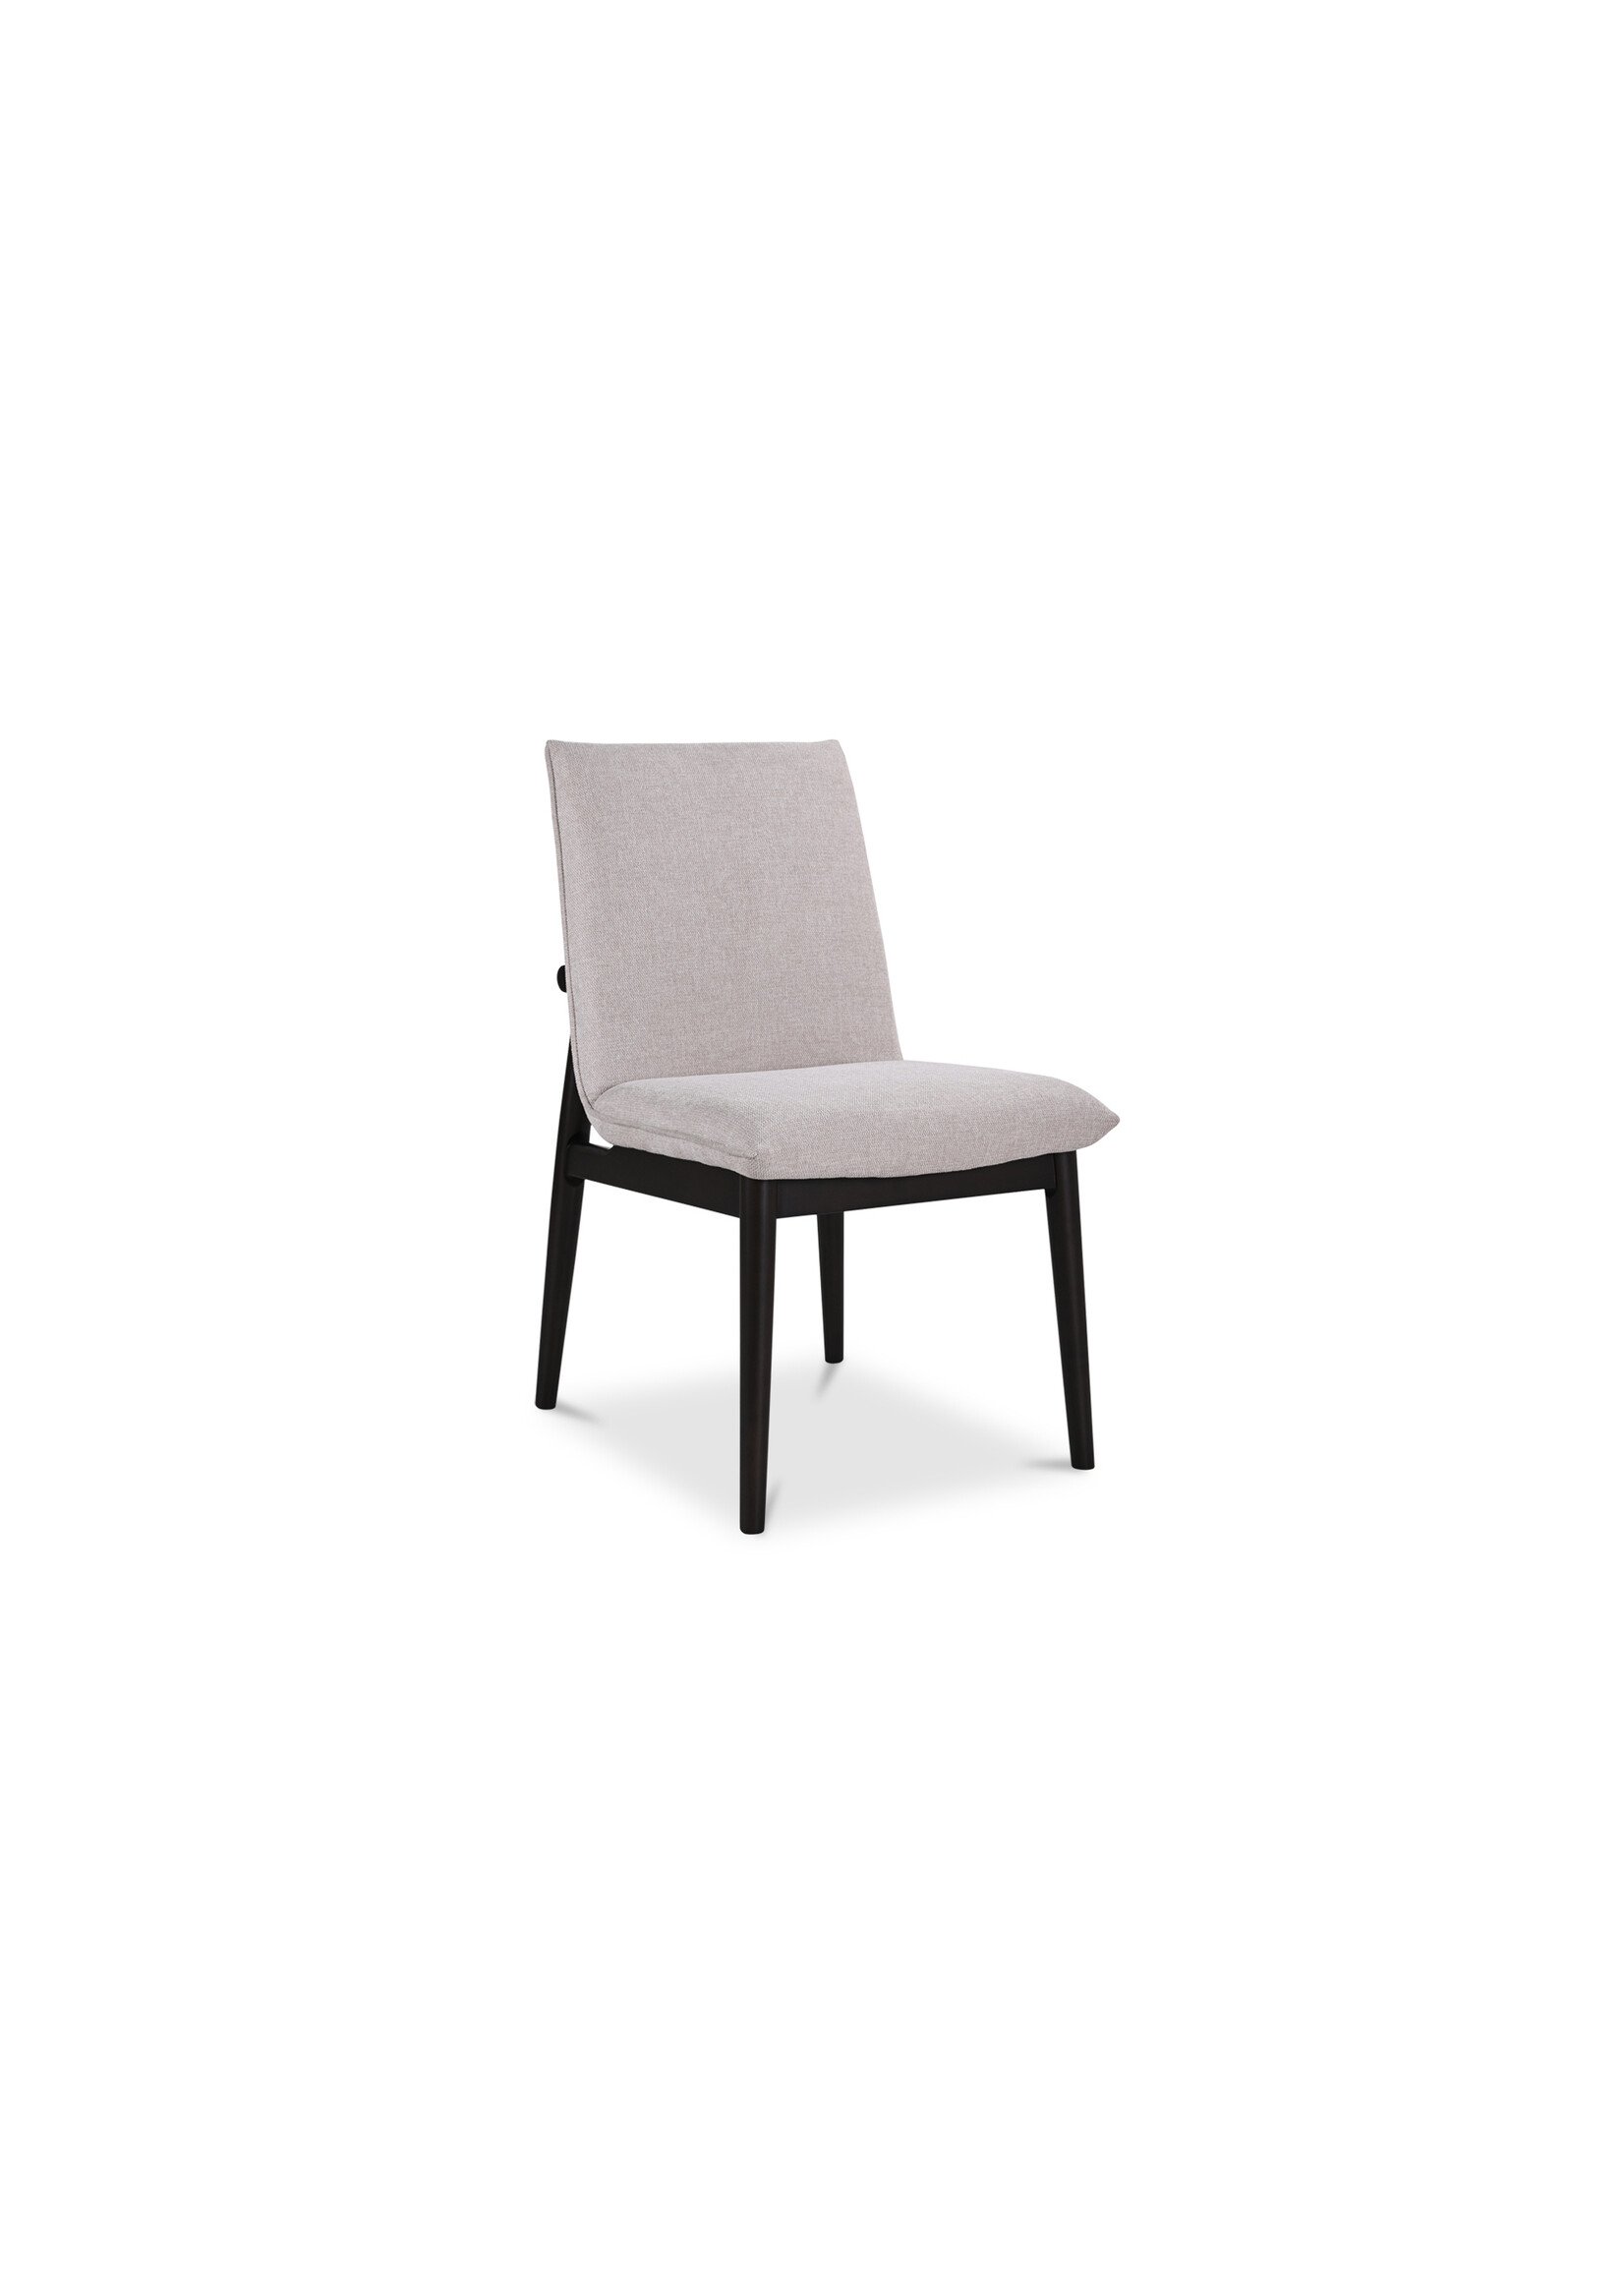 Charlie Dining Chair - Beige